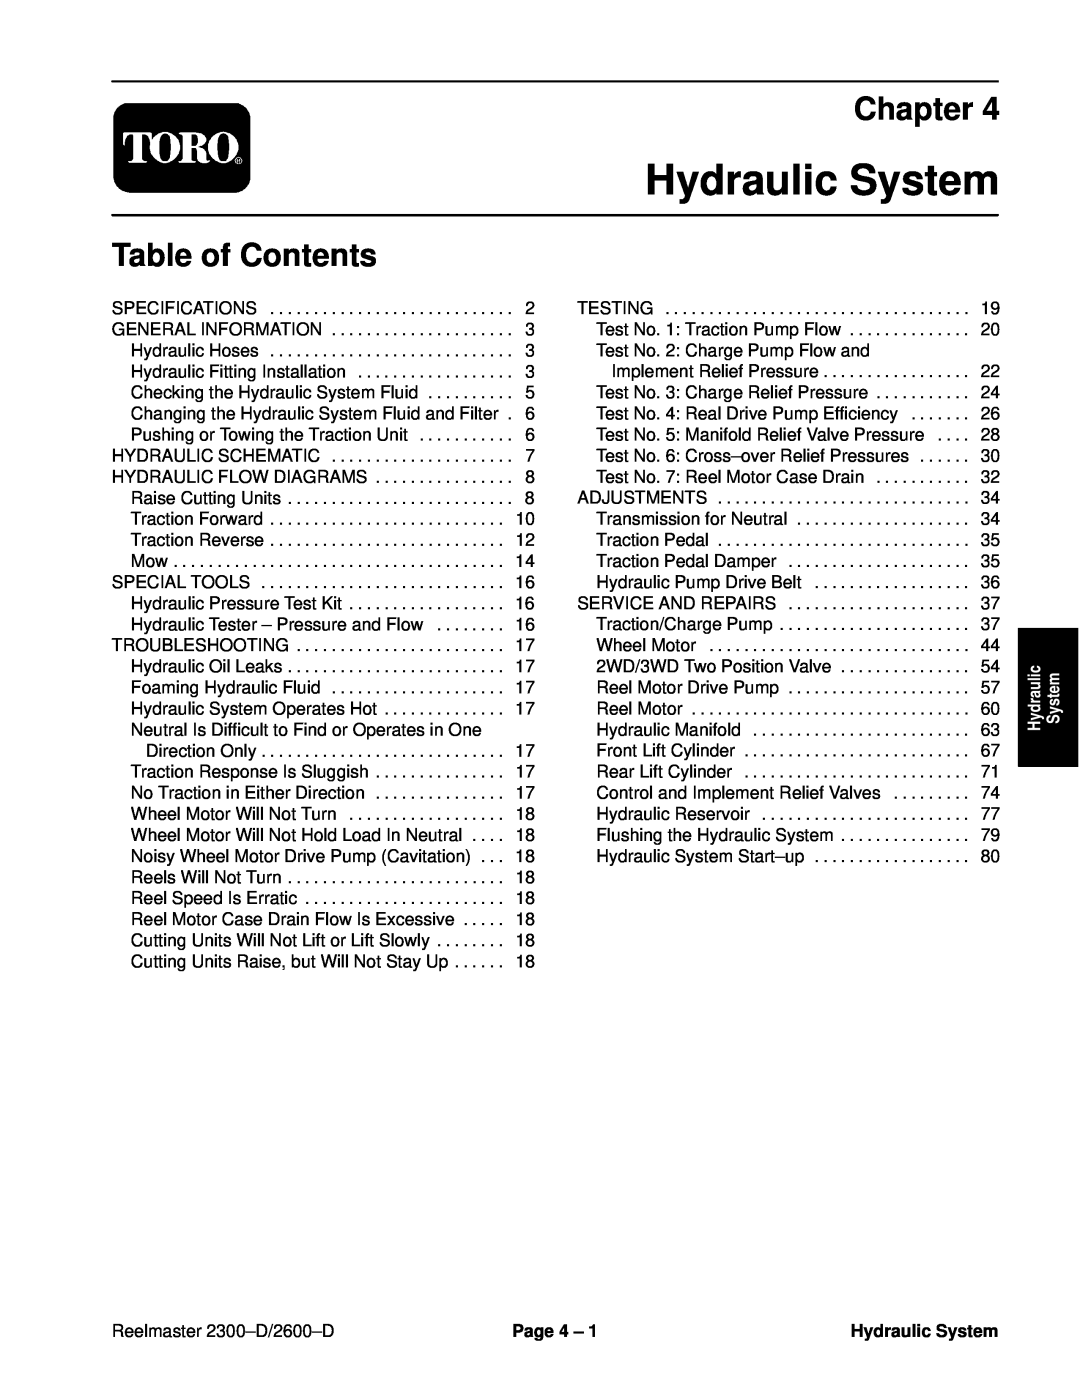 Toro 2600D, 2300-D service manual Hydraulic System, Chapter, Table of Contents, Reelmaster 2300±D/2600±D, Page 4 ± 